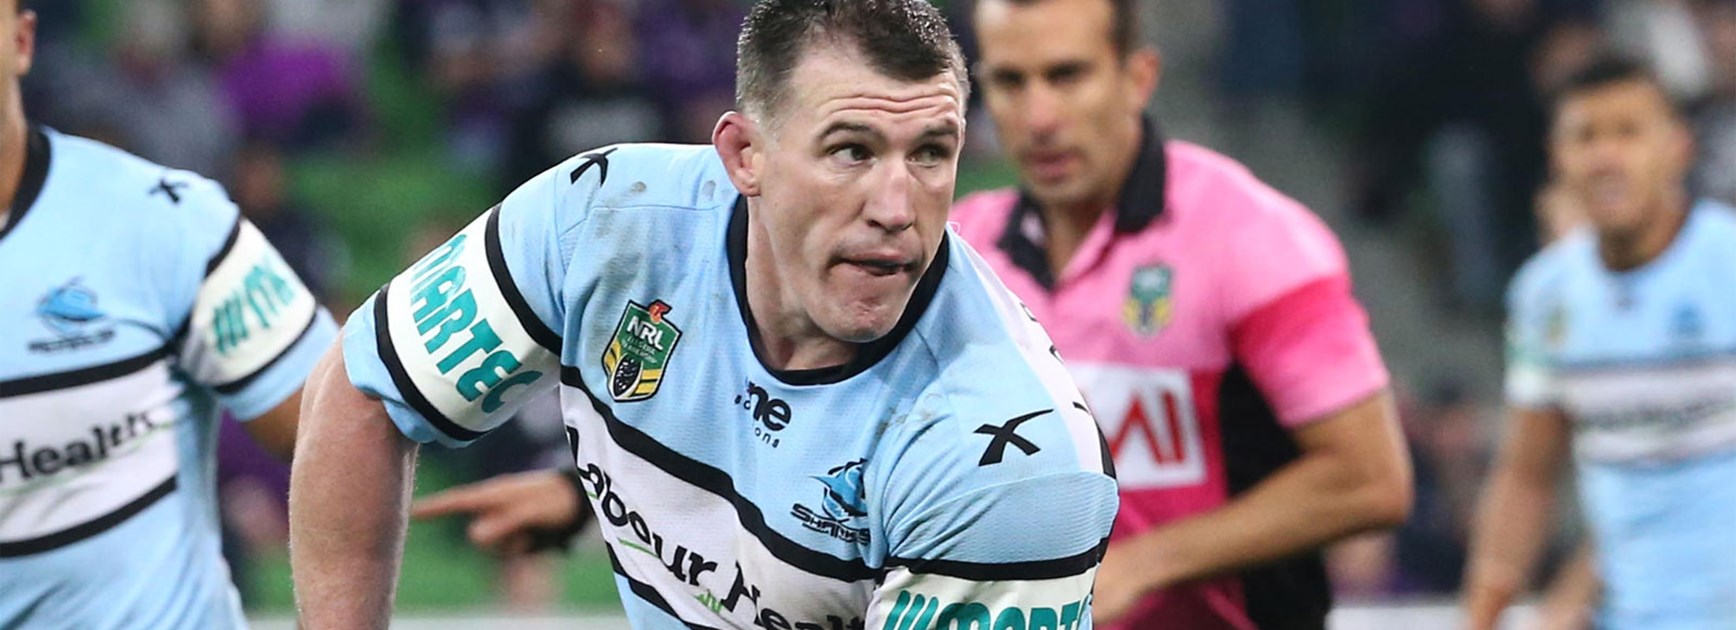 Paul Gallen only played nine NRL games last season but is expected to be among the top NRL Fantasy players once again in 2015.